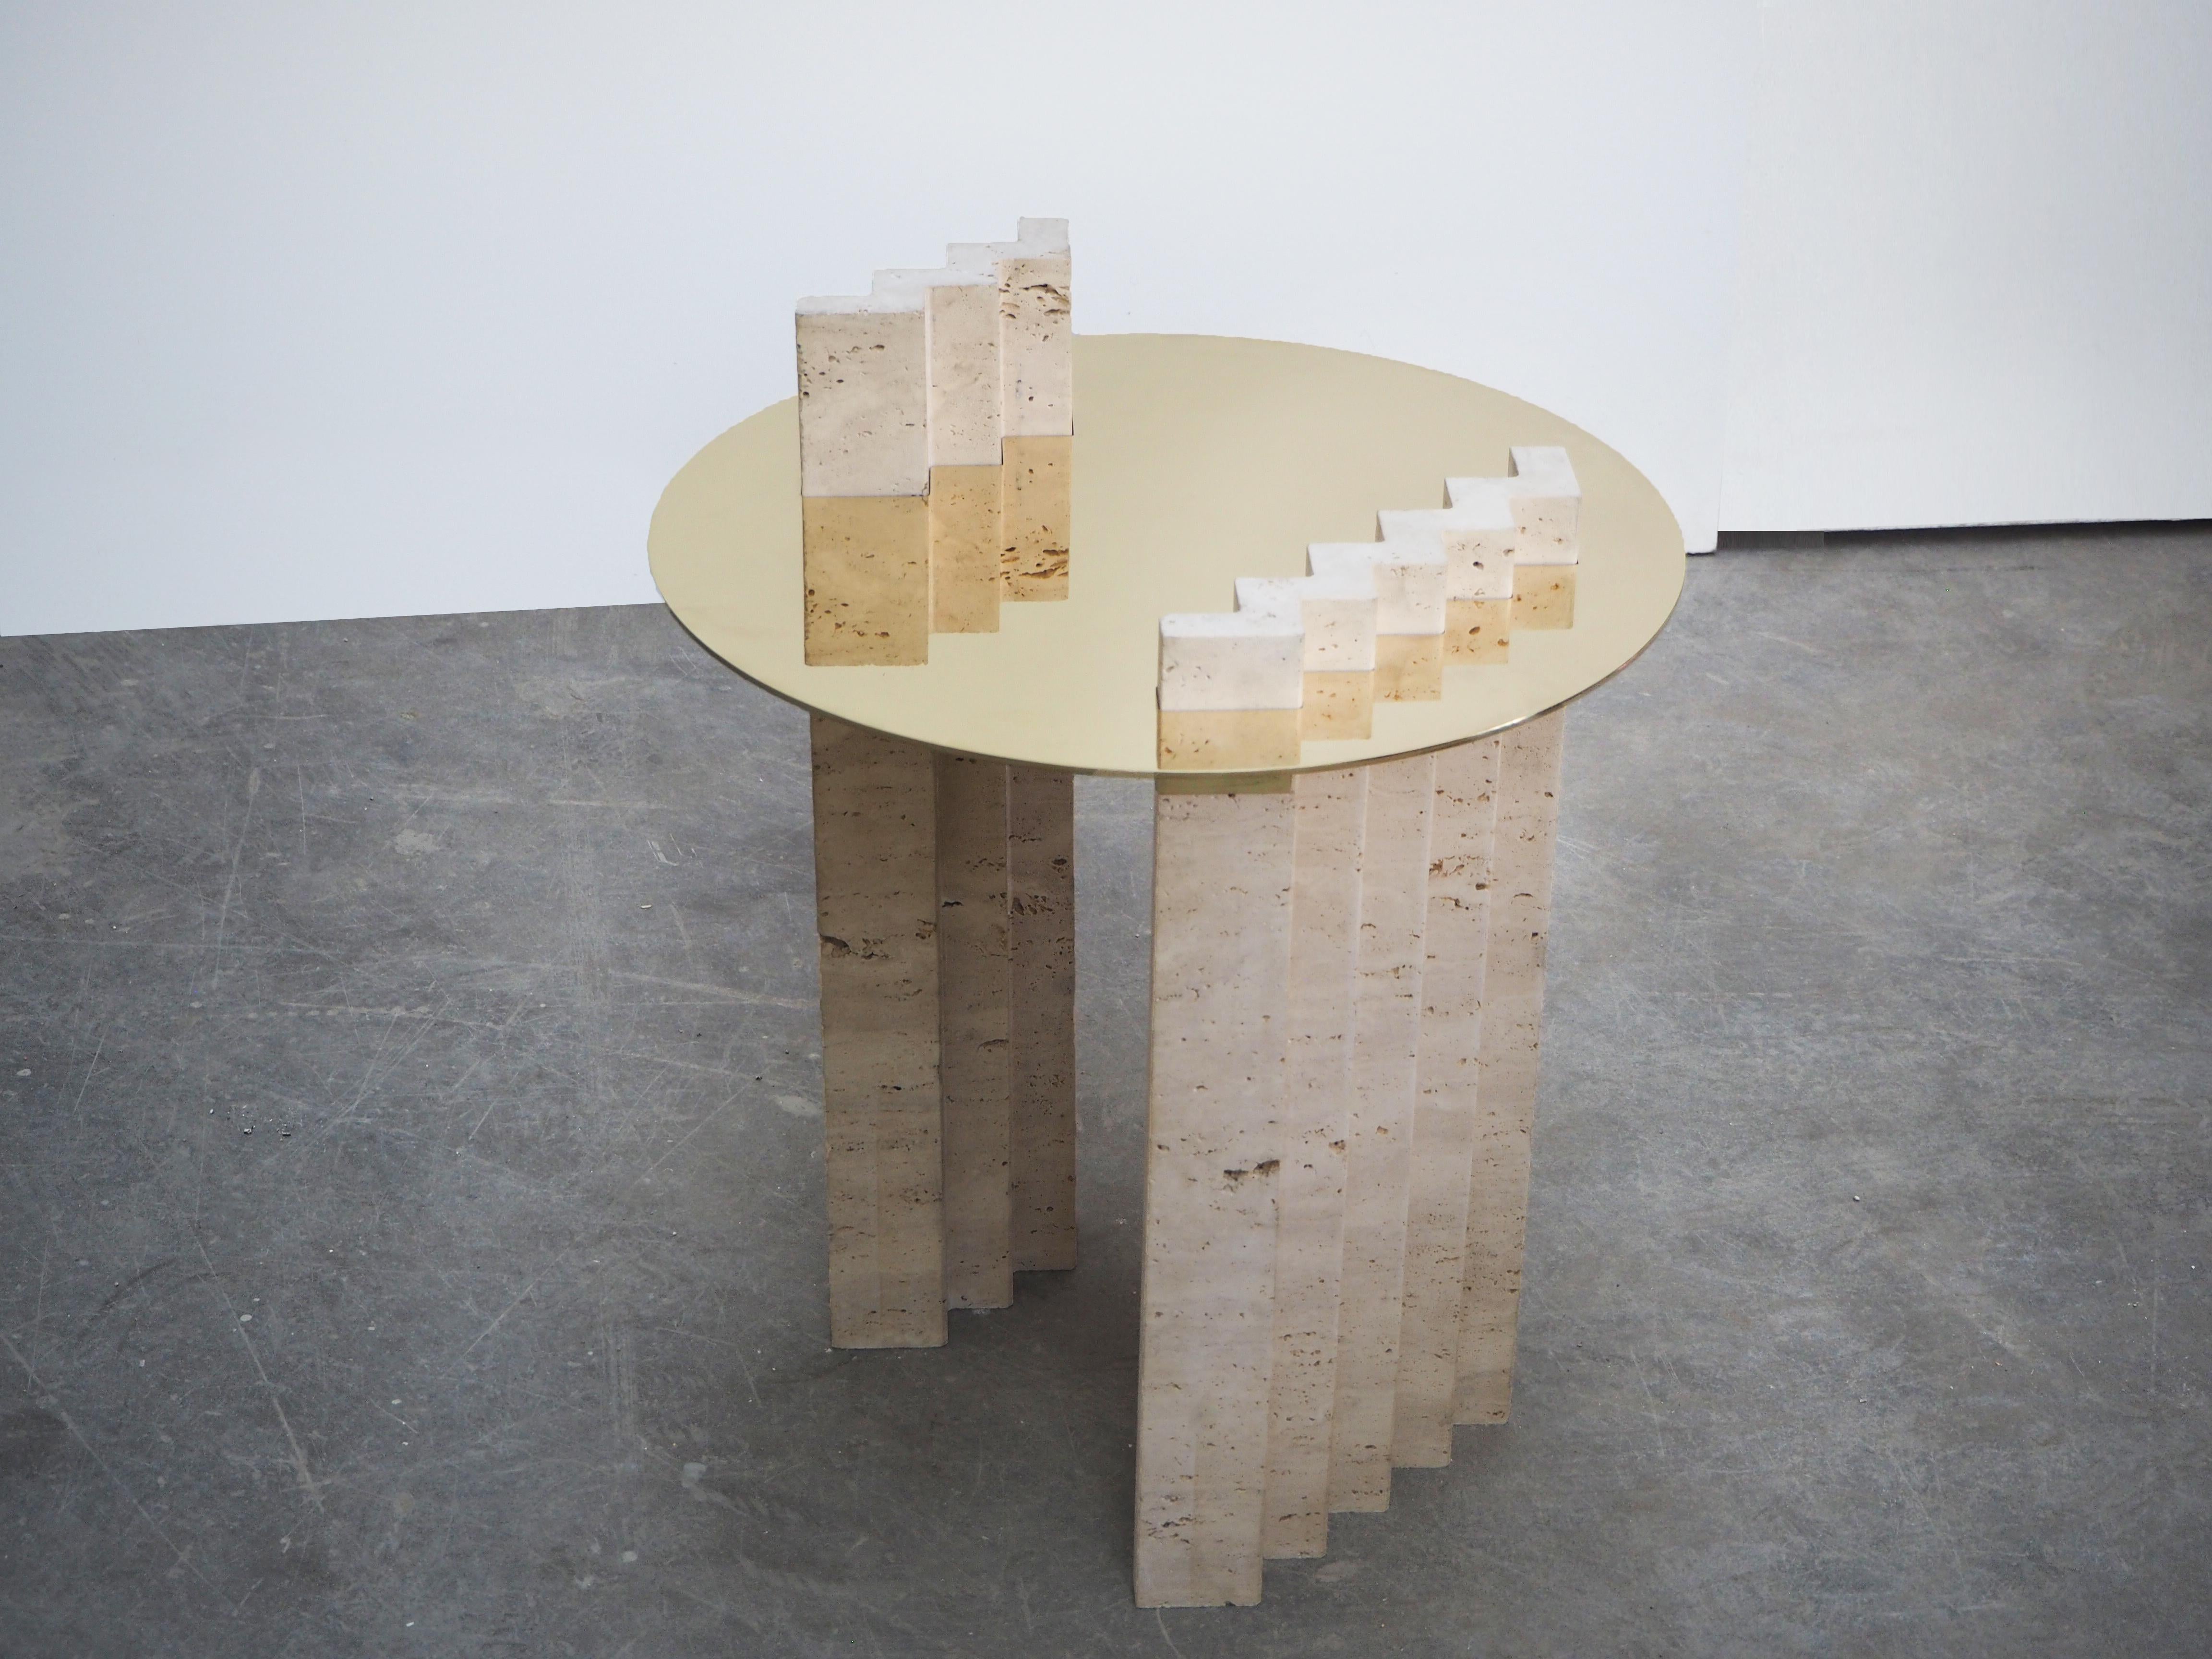 Side table travertine and brass sculpted by Dessislava Madanska.
One design space.
Sculpted side table.
Dimensions: W 50 x D 50 x H 60 cm.
Materials: travertine and polished brass.
A limited edition of 12 pieces + 4 A.P.

Dessislava Madanska